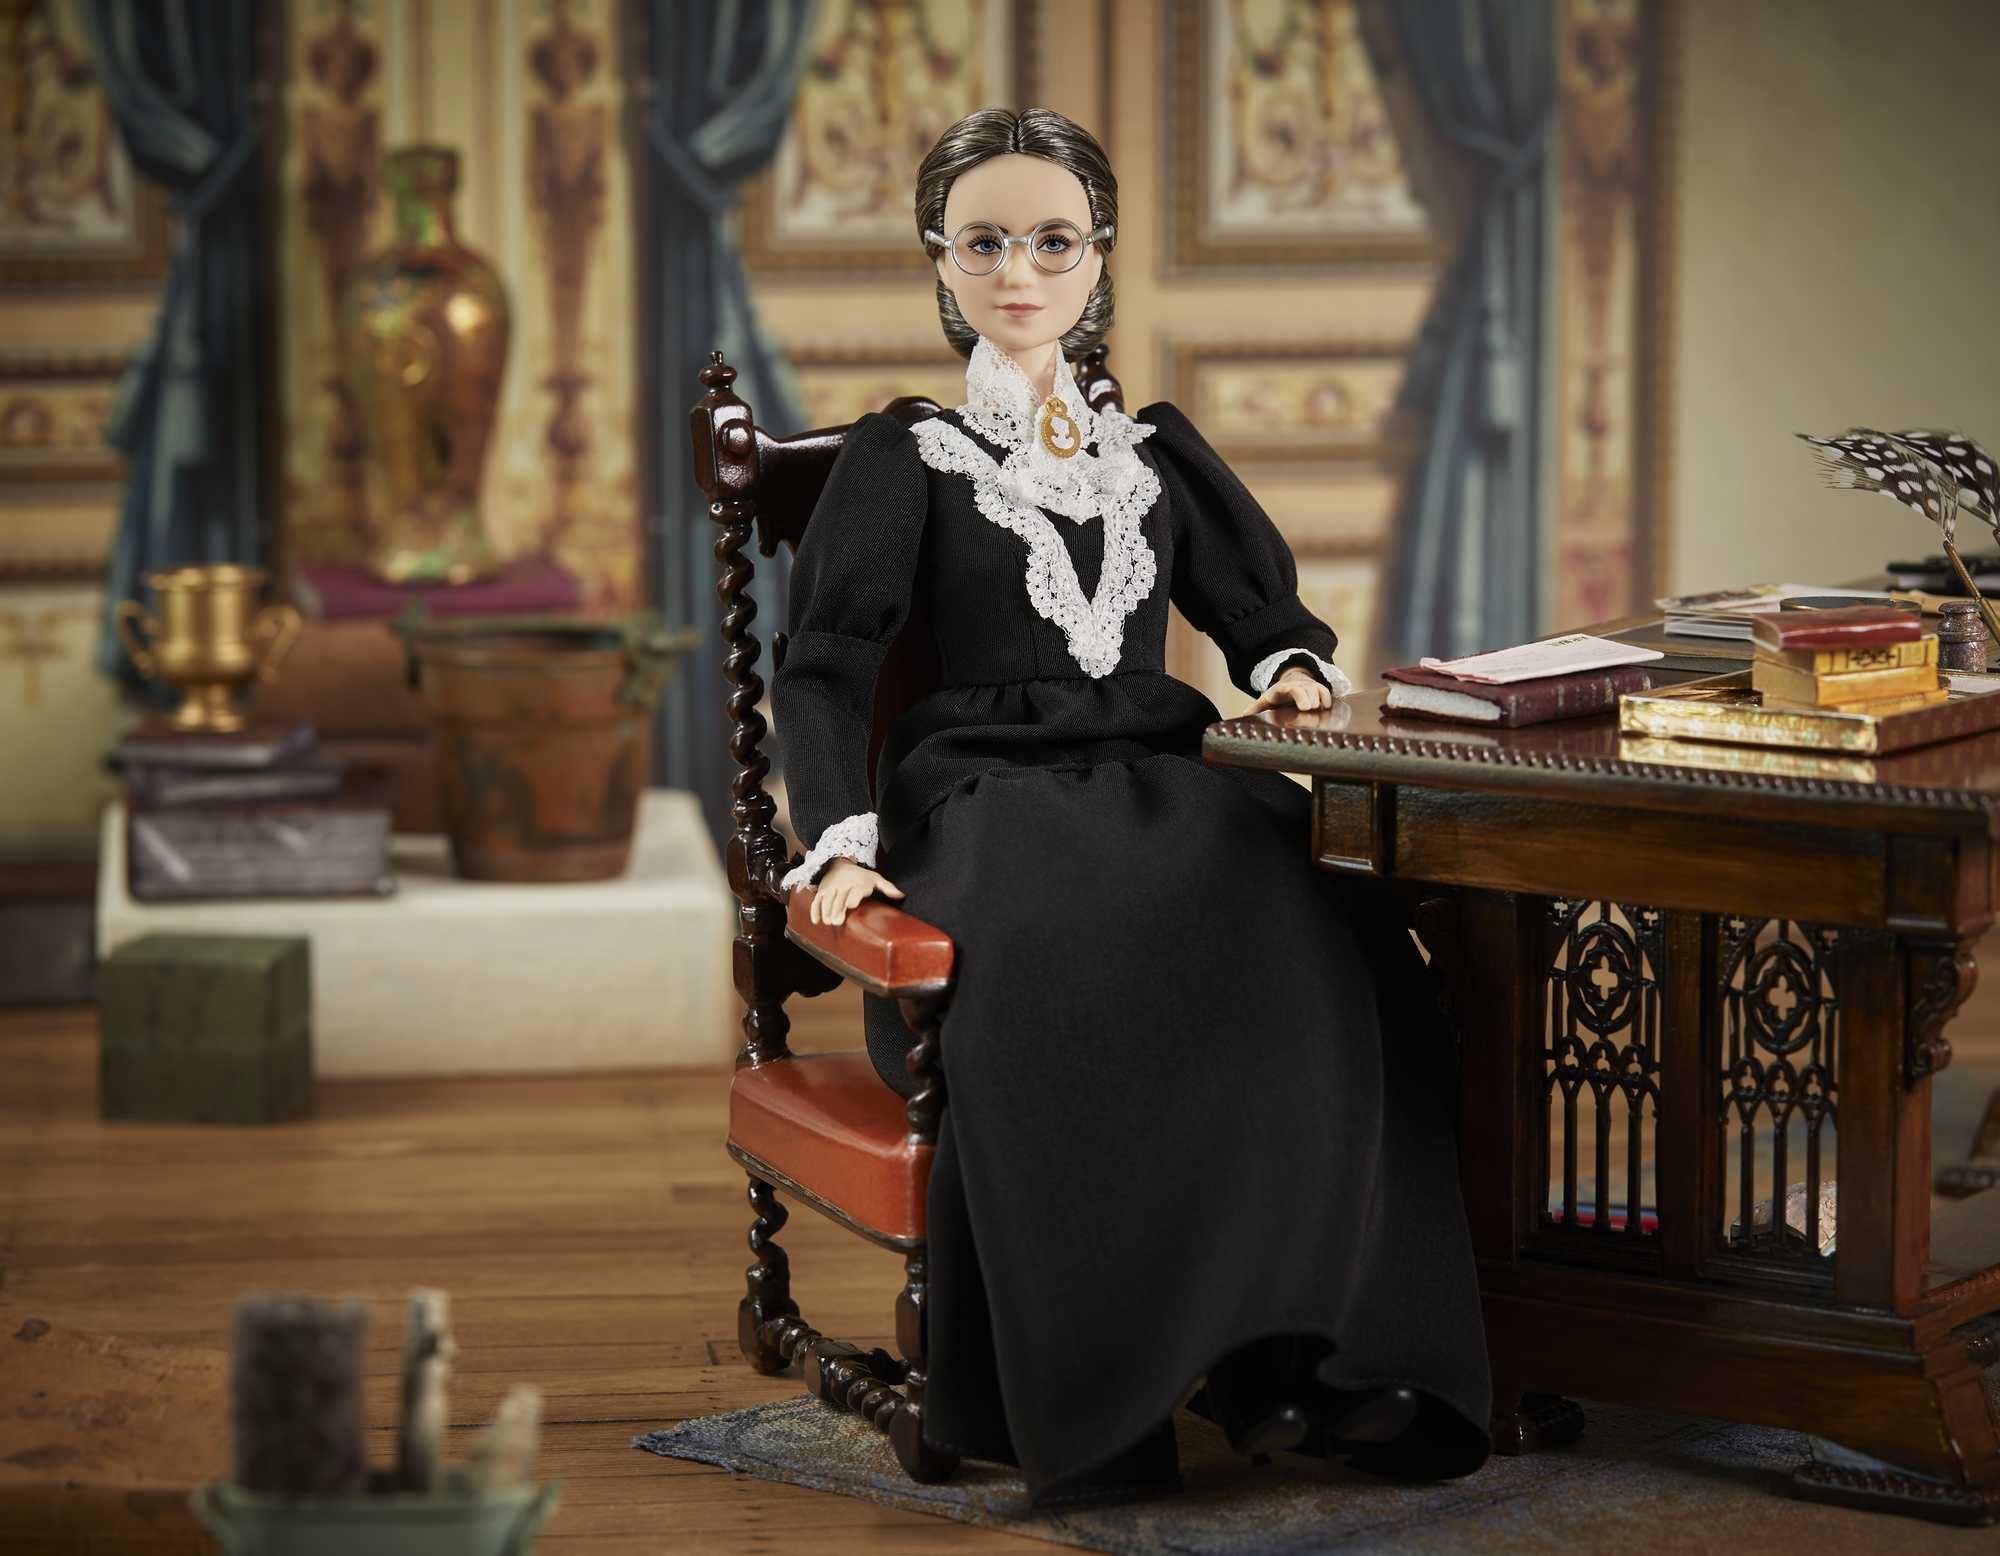 Barbie Inspiring Women Susan B. Anthony Collectible Doll in Black Dress with Doll Stand - image 5 of 7